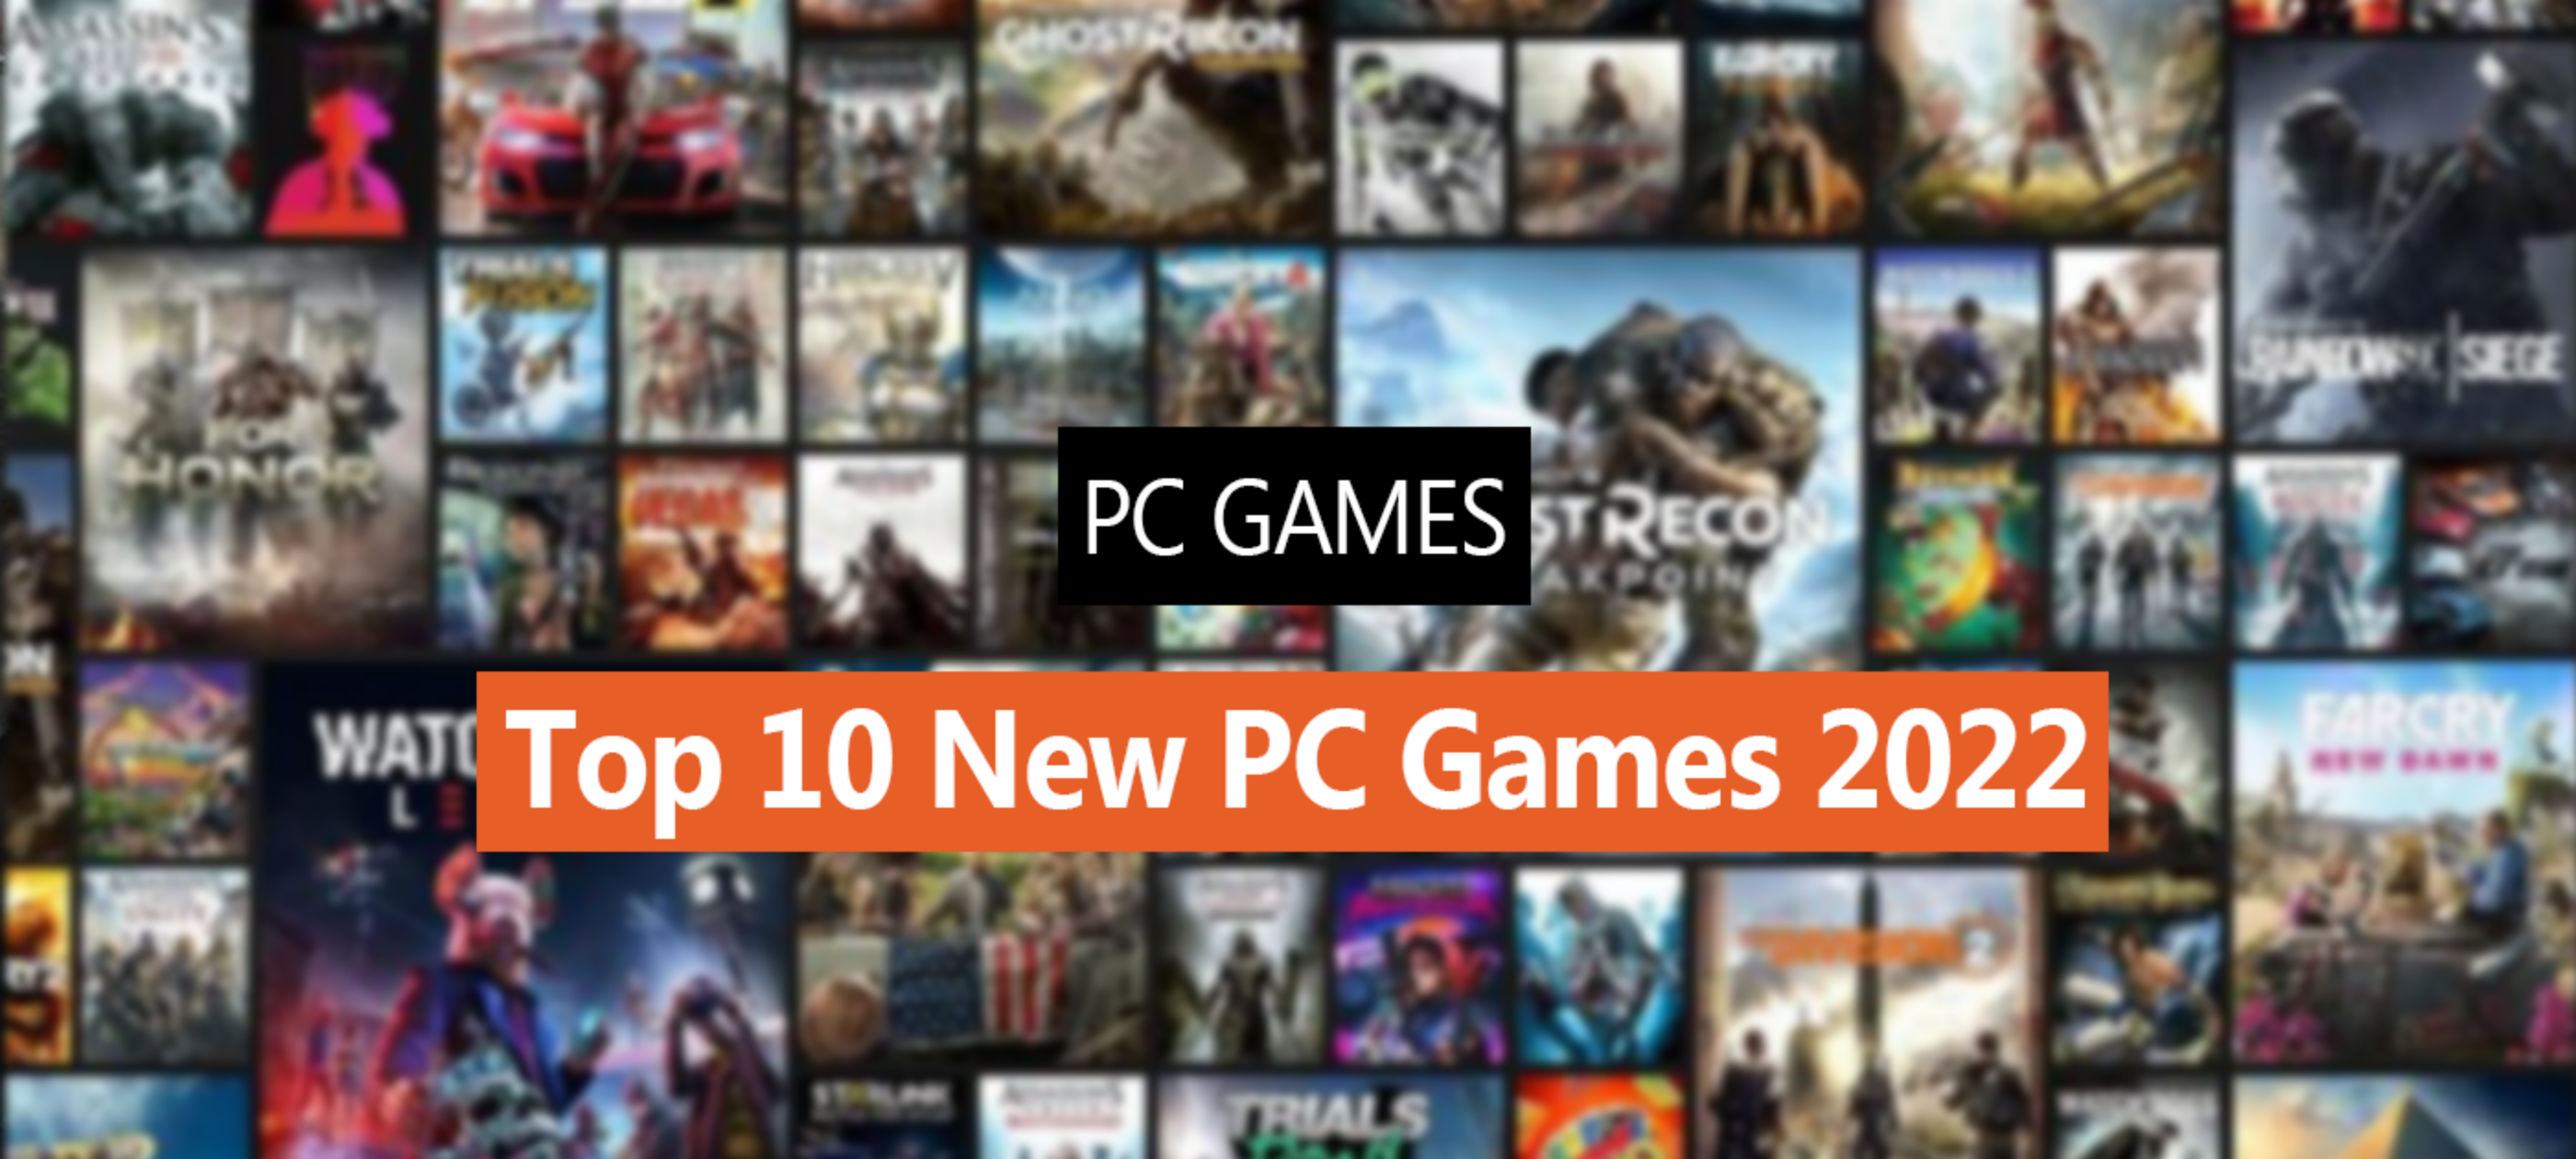 Top 10 New PC Games 2022 - First